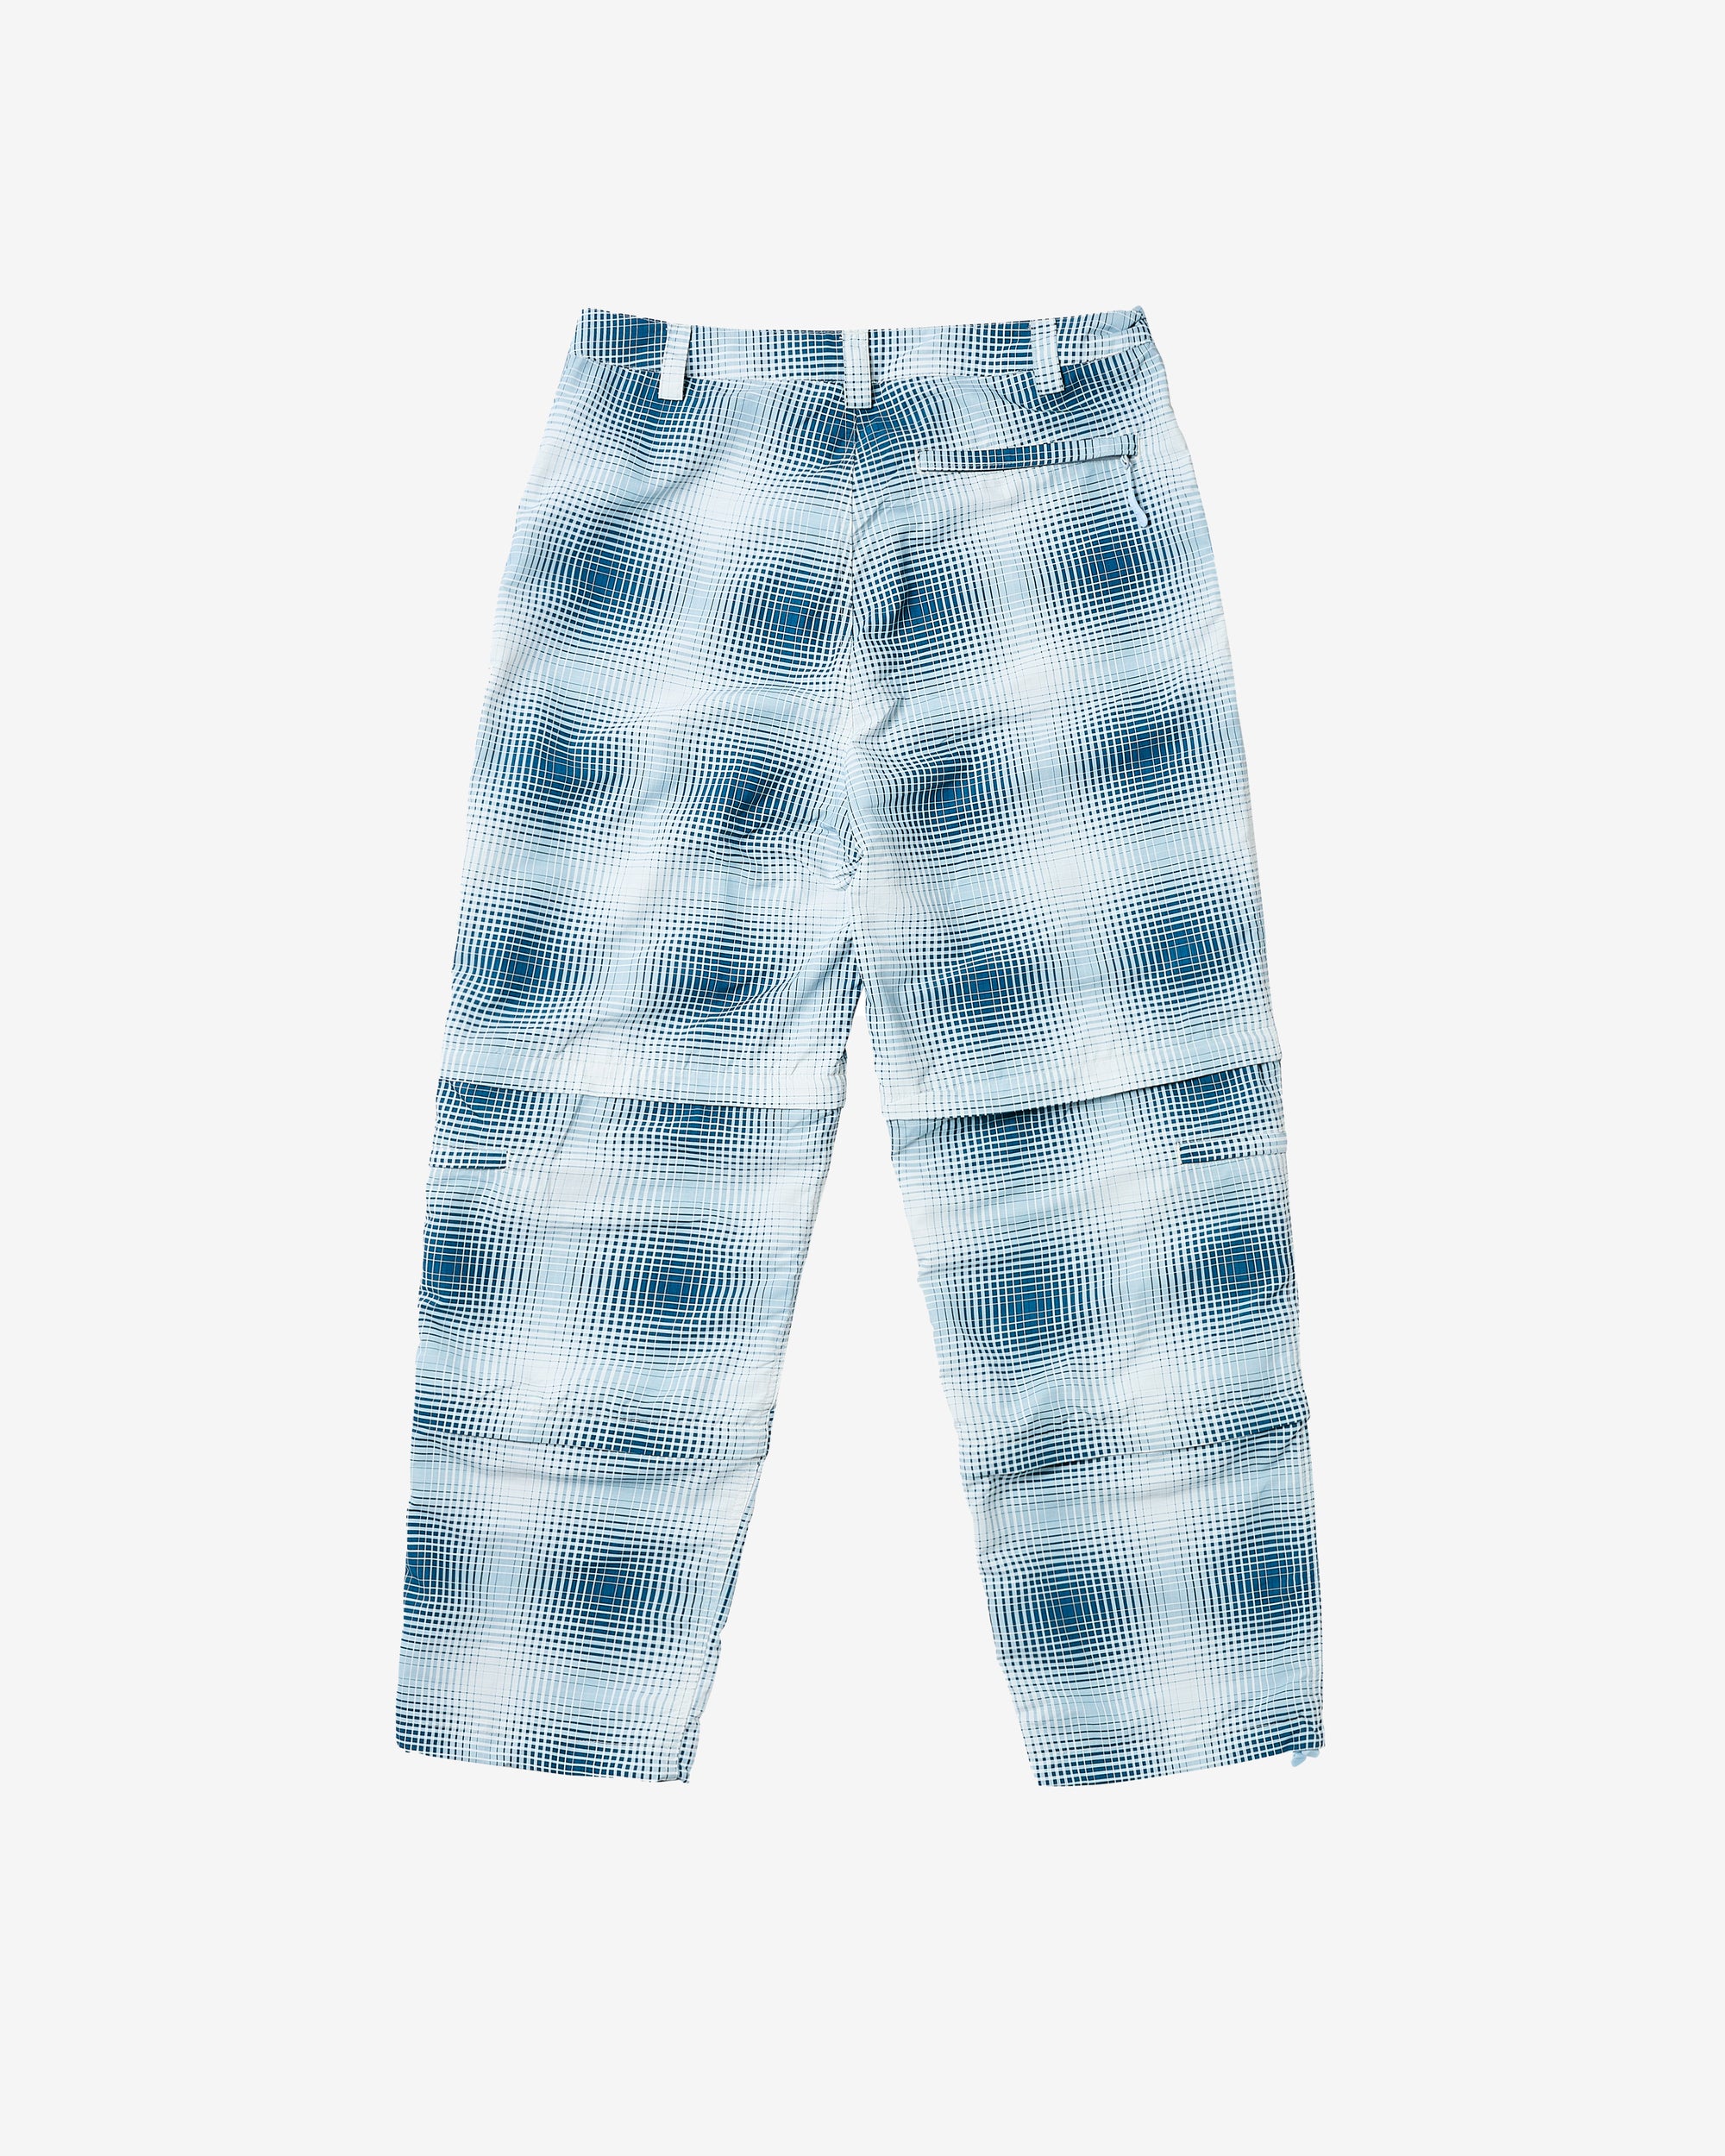 Palace - Men's Bare Levels Trouser - (Check) view 2